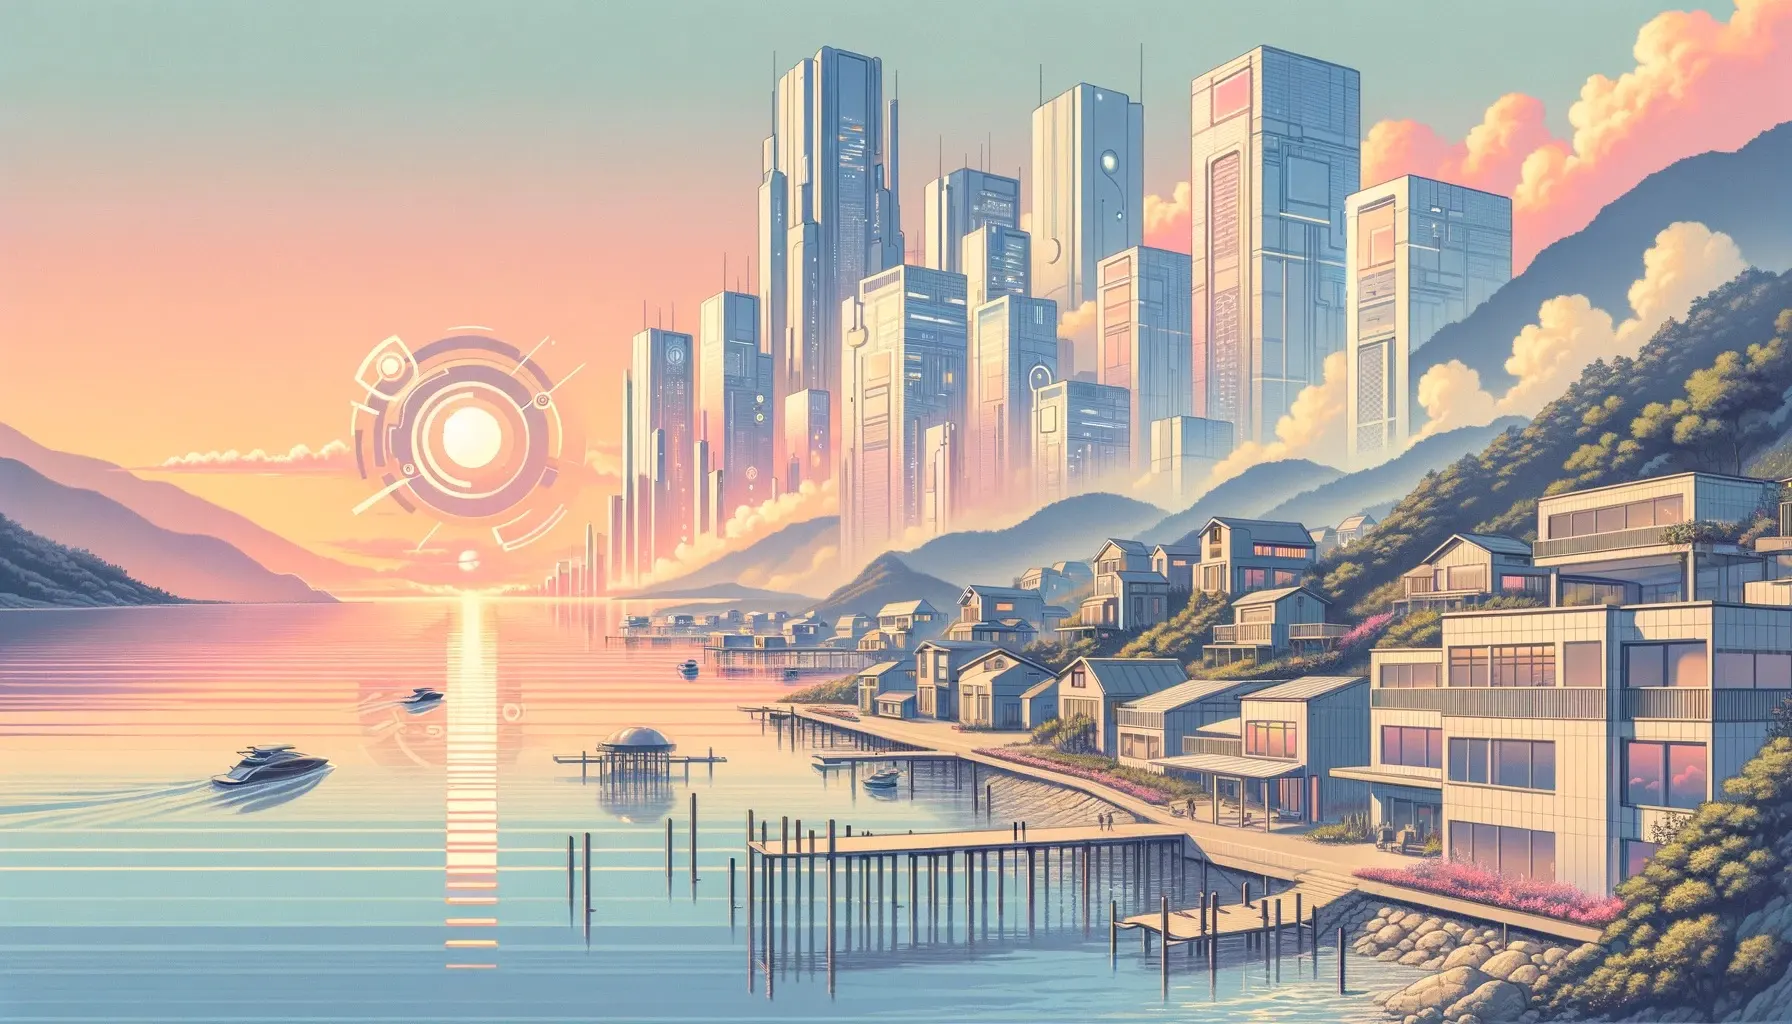 A vivid, dreamlike cityscape bathed in the glow of sunset, with abstract cryptographic structures in the sky, alludes to the transformative potential of zkSNARKs and zkSTARKs in addressing the inherent limitations of the Ethereum Virtual Machine, heralding a future of enhanced scalability and efficiency.